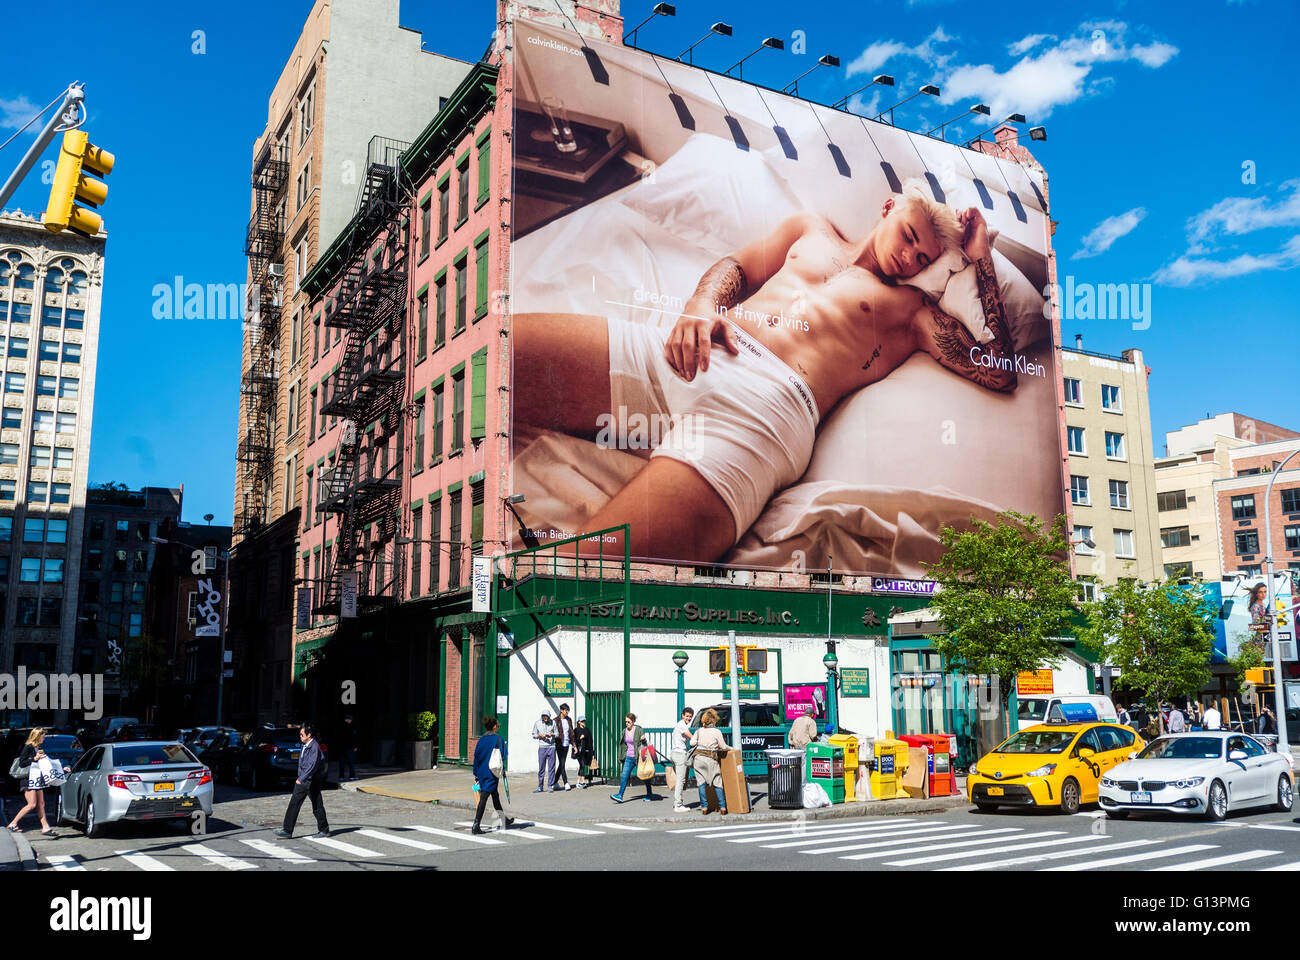 New York, NY May 8th 2016 Calvin Klein billboard advertisement, in the NoHo  neighborhood of Manhattan, features pop star Justin Bieber toughing  himself. © Stacy Walsh Rosenstock Stock Photo - Alamy